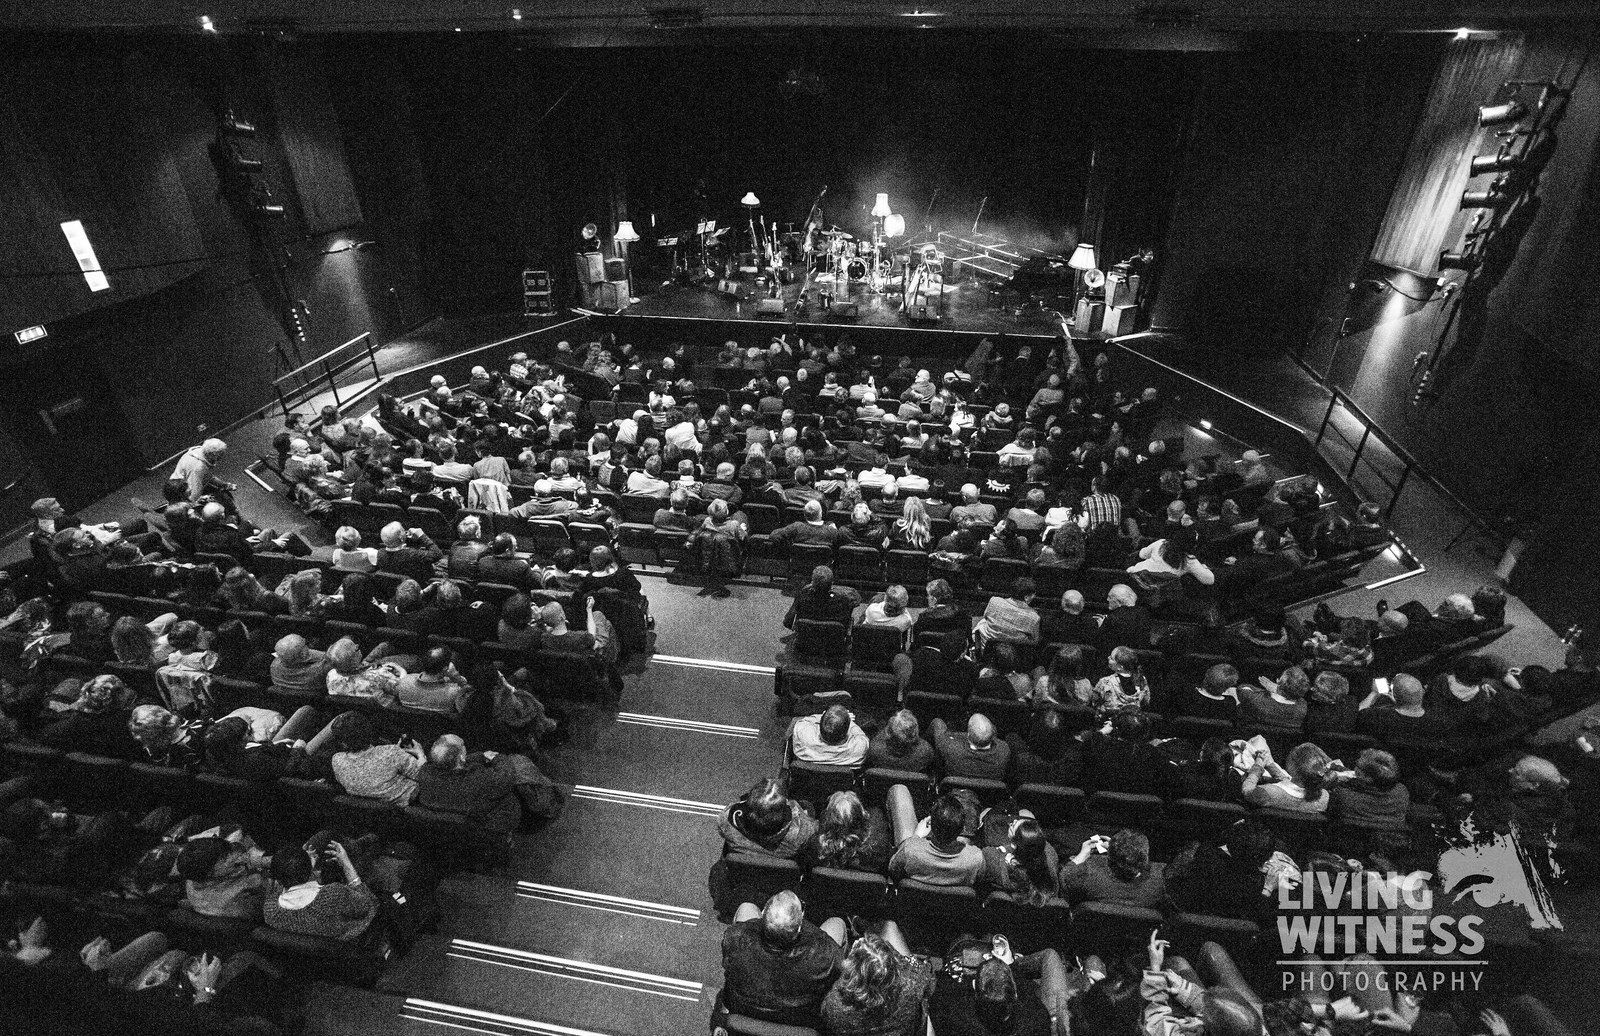 A full house enjoying the Henry Girls in concert at An Grianan Theatre, Donegal in Feb 2014. Photo by Living Witness Photography. All rights reserved. Do not reproduce without permission.